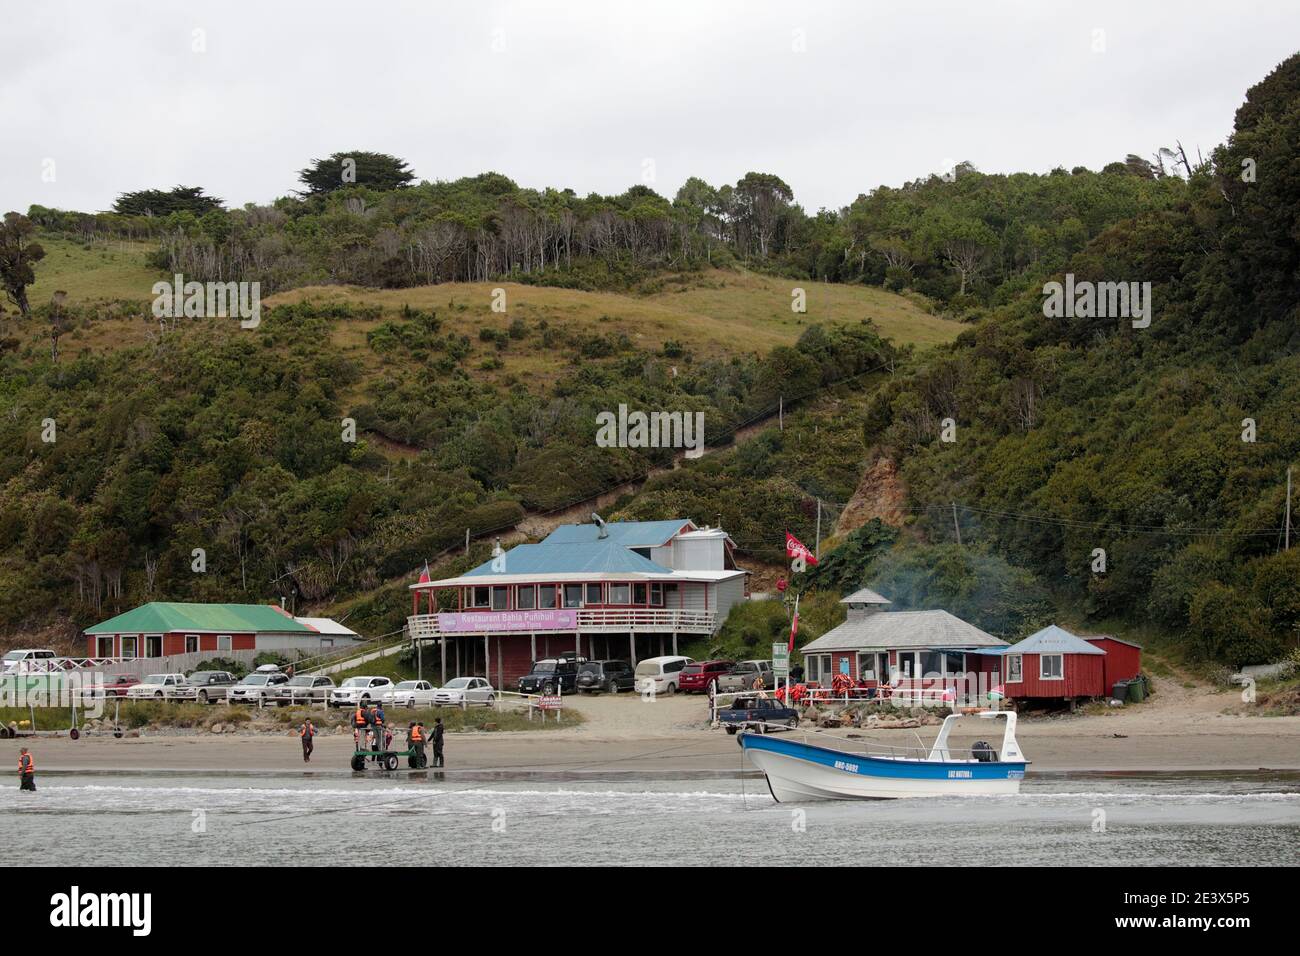 Restaurant and tourist boats, penguin colony at Bahia Punihuil, Chiloe Island, Los Lagos Region, south Chile 11th Jan 2016 Stock Photo